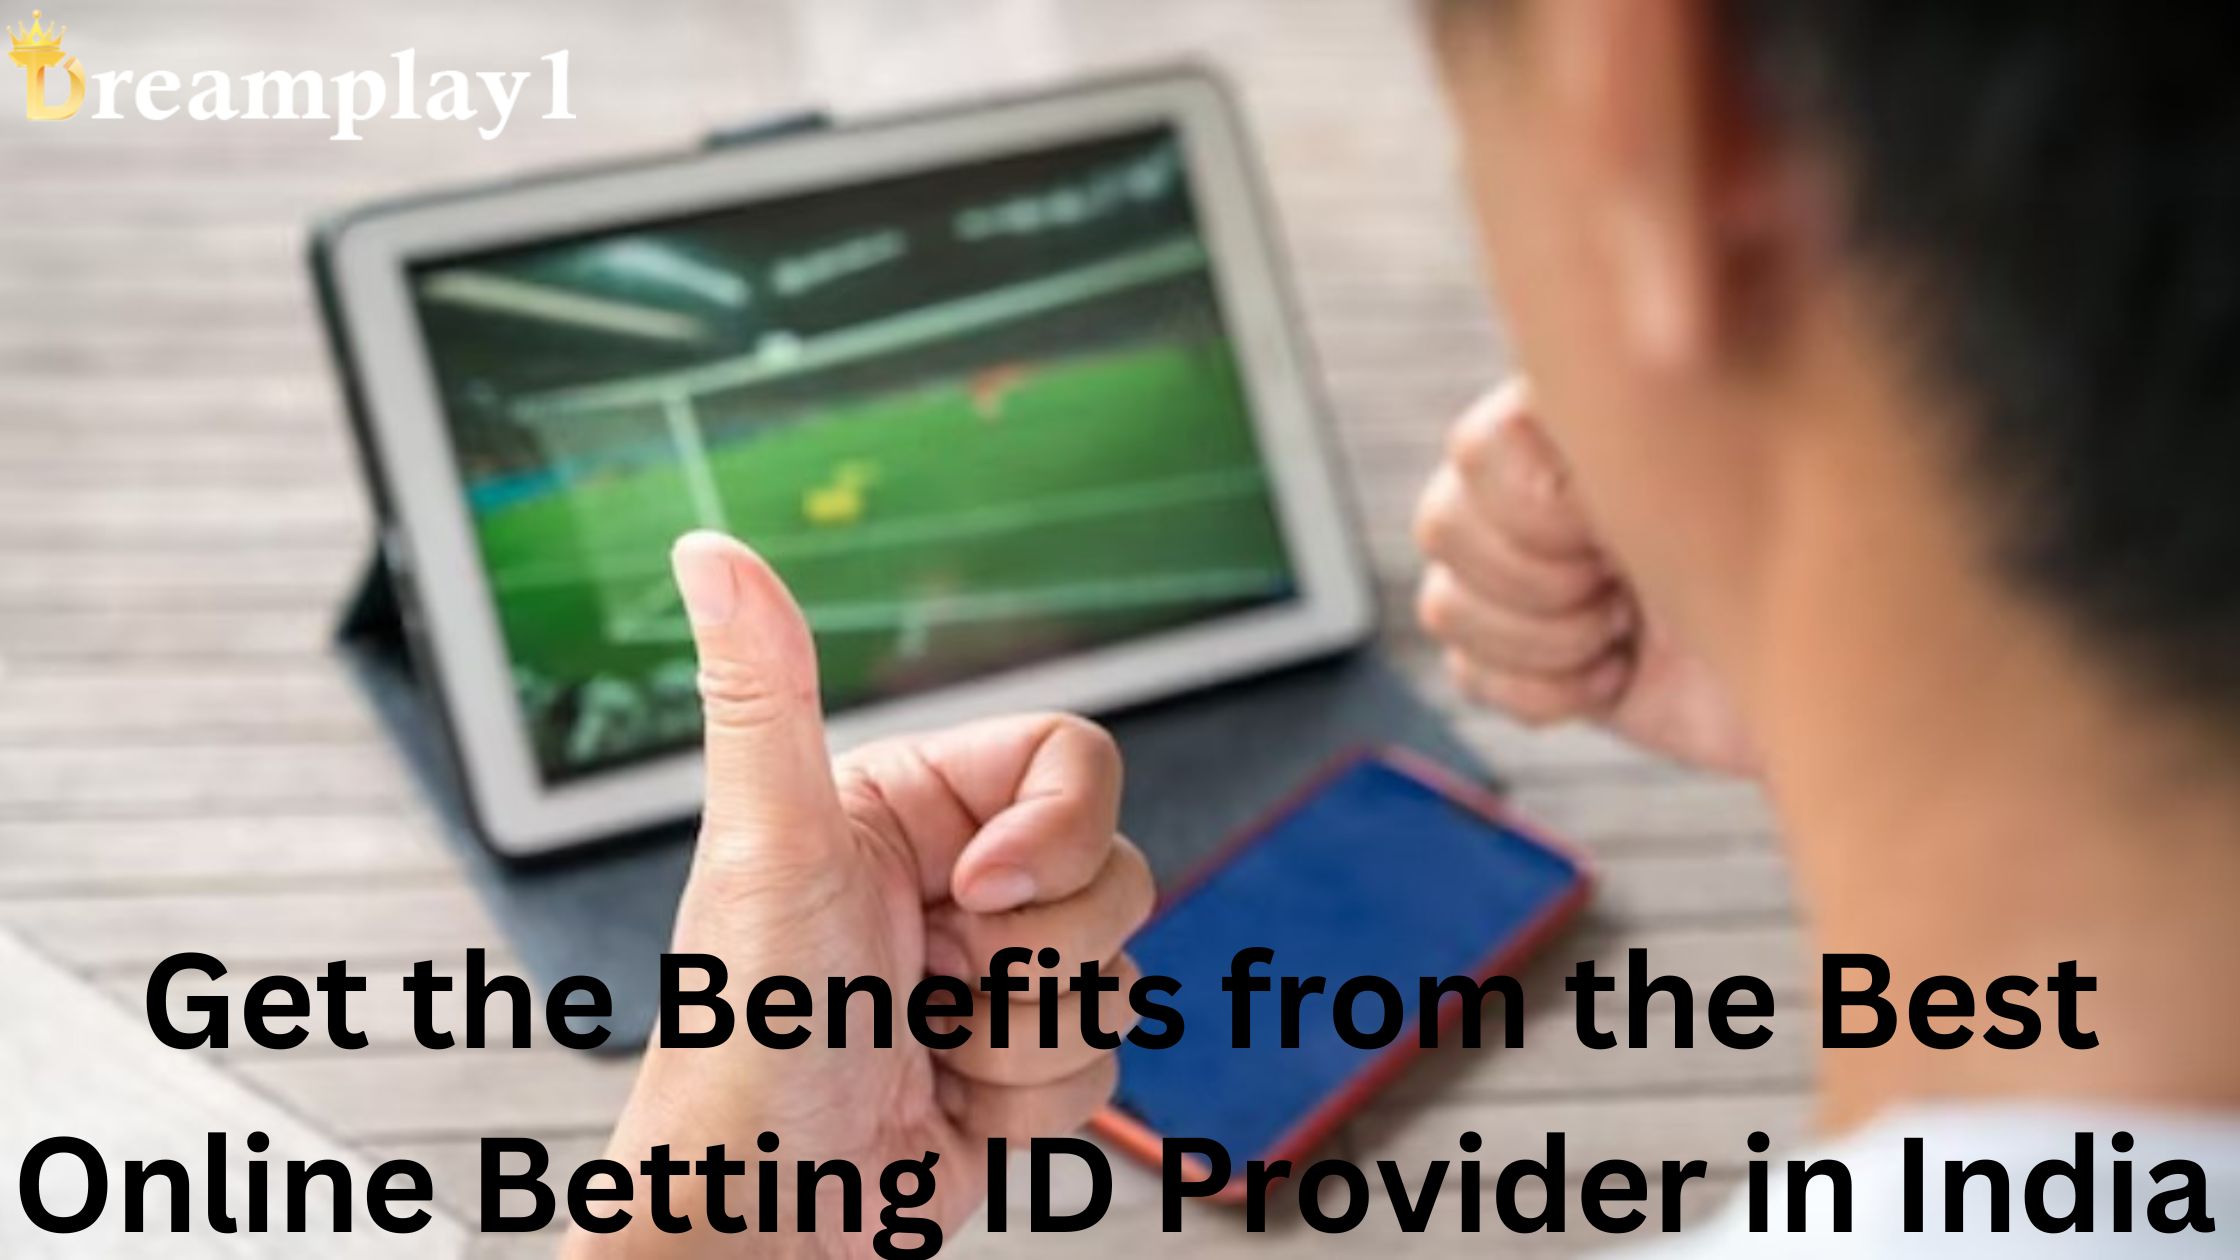 Best Online Betting ID Provider in India: How to Get the Benefits